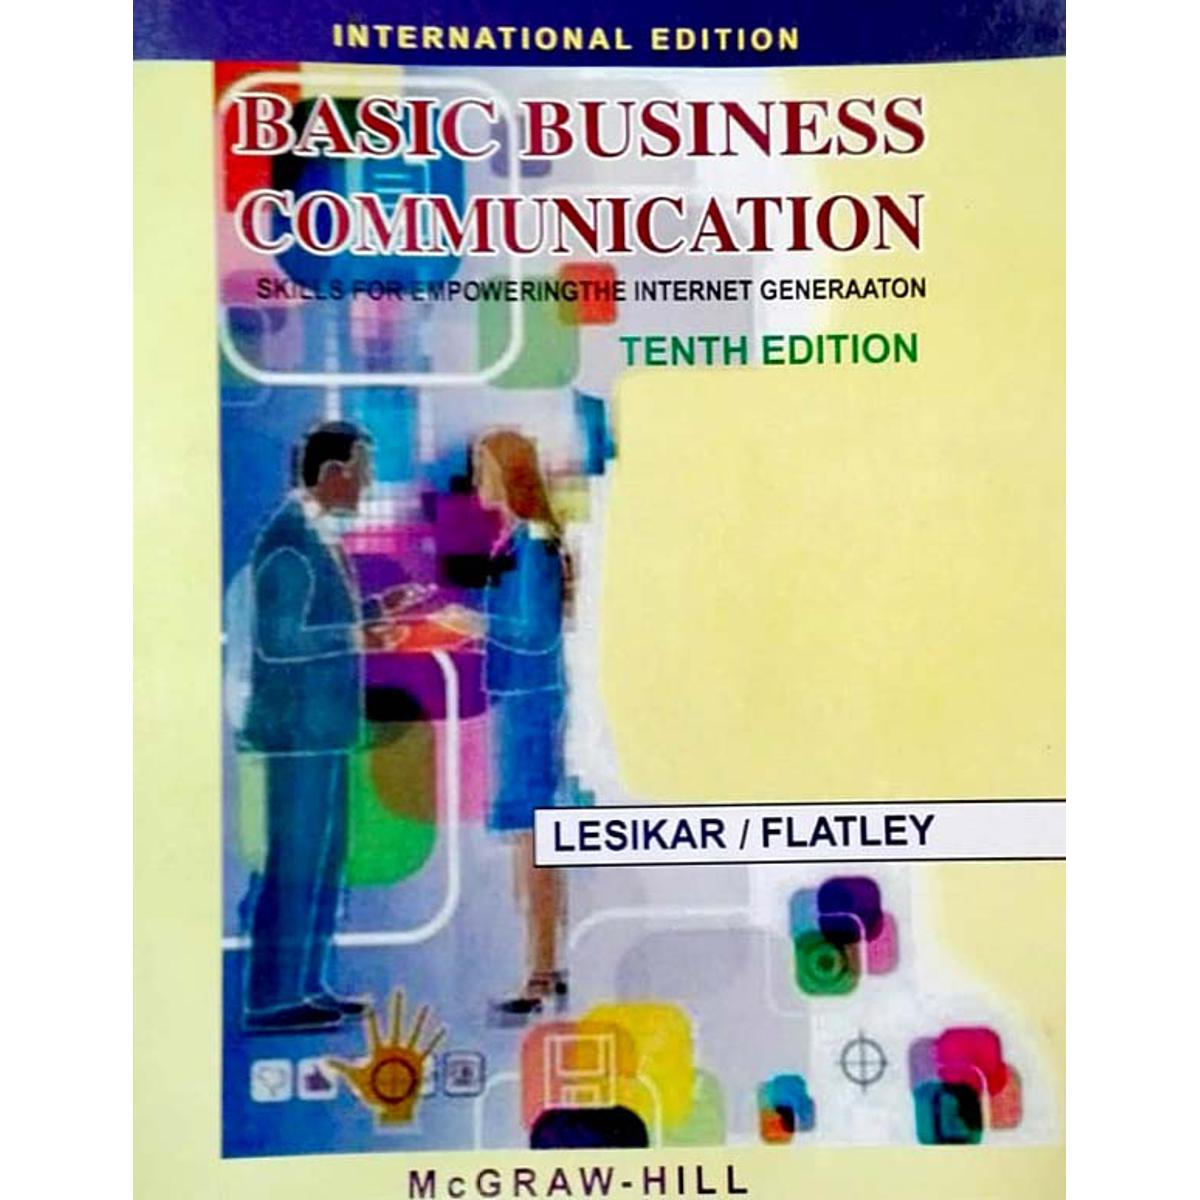 Basic Business Communication 10th Edition (Mcgraw-Hill)